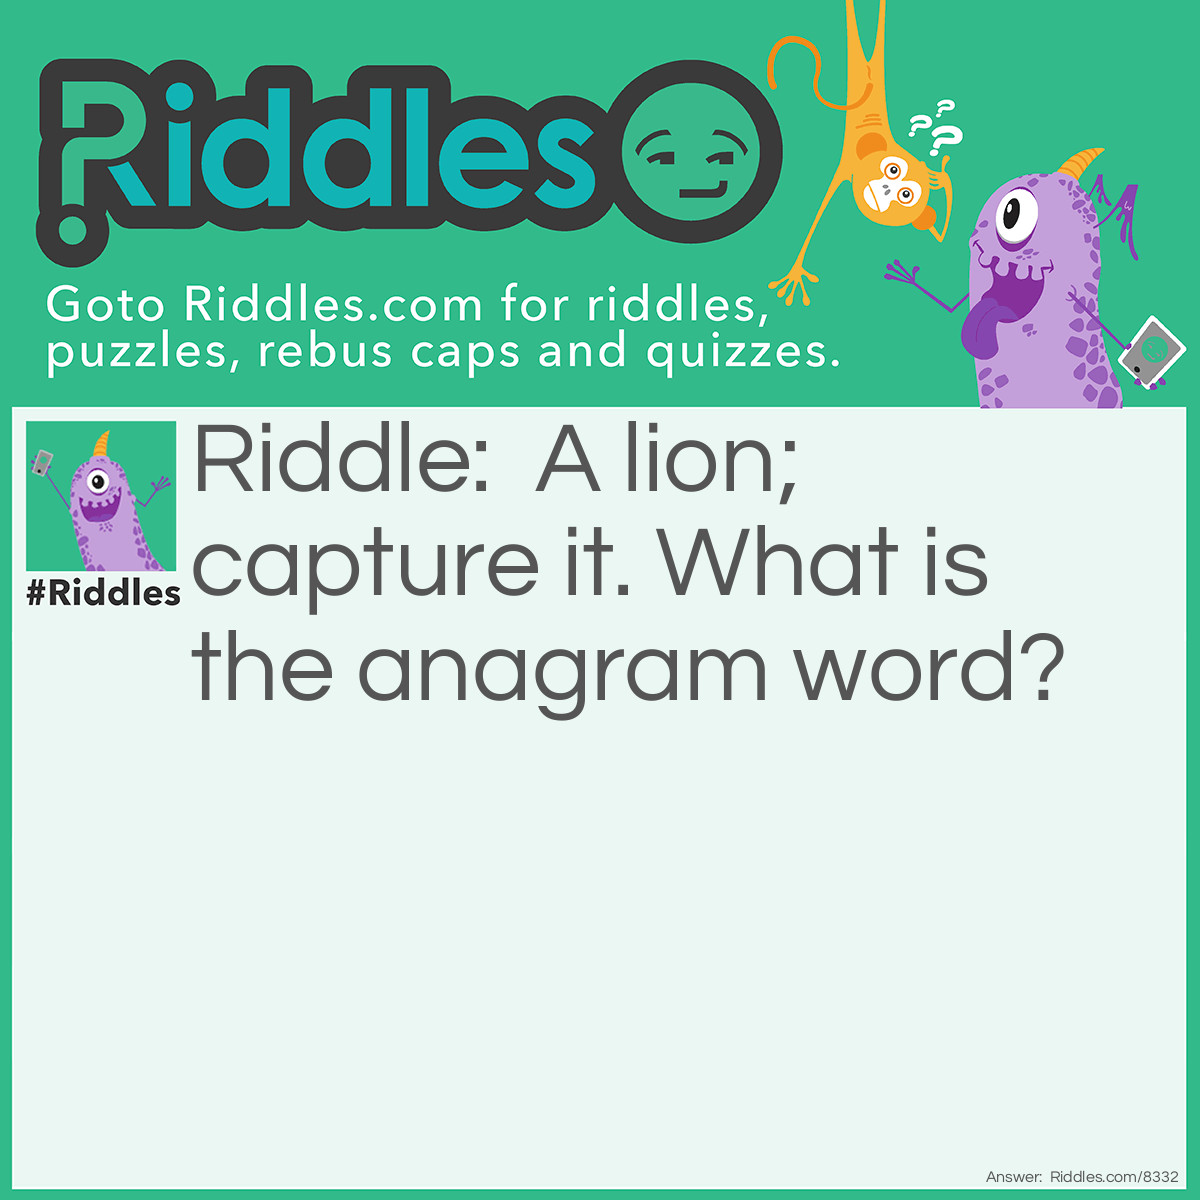 Riddle: A lion; capture it. What is the anagram word? Answer: Recapitulation.